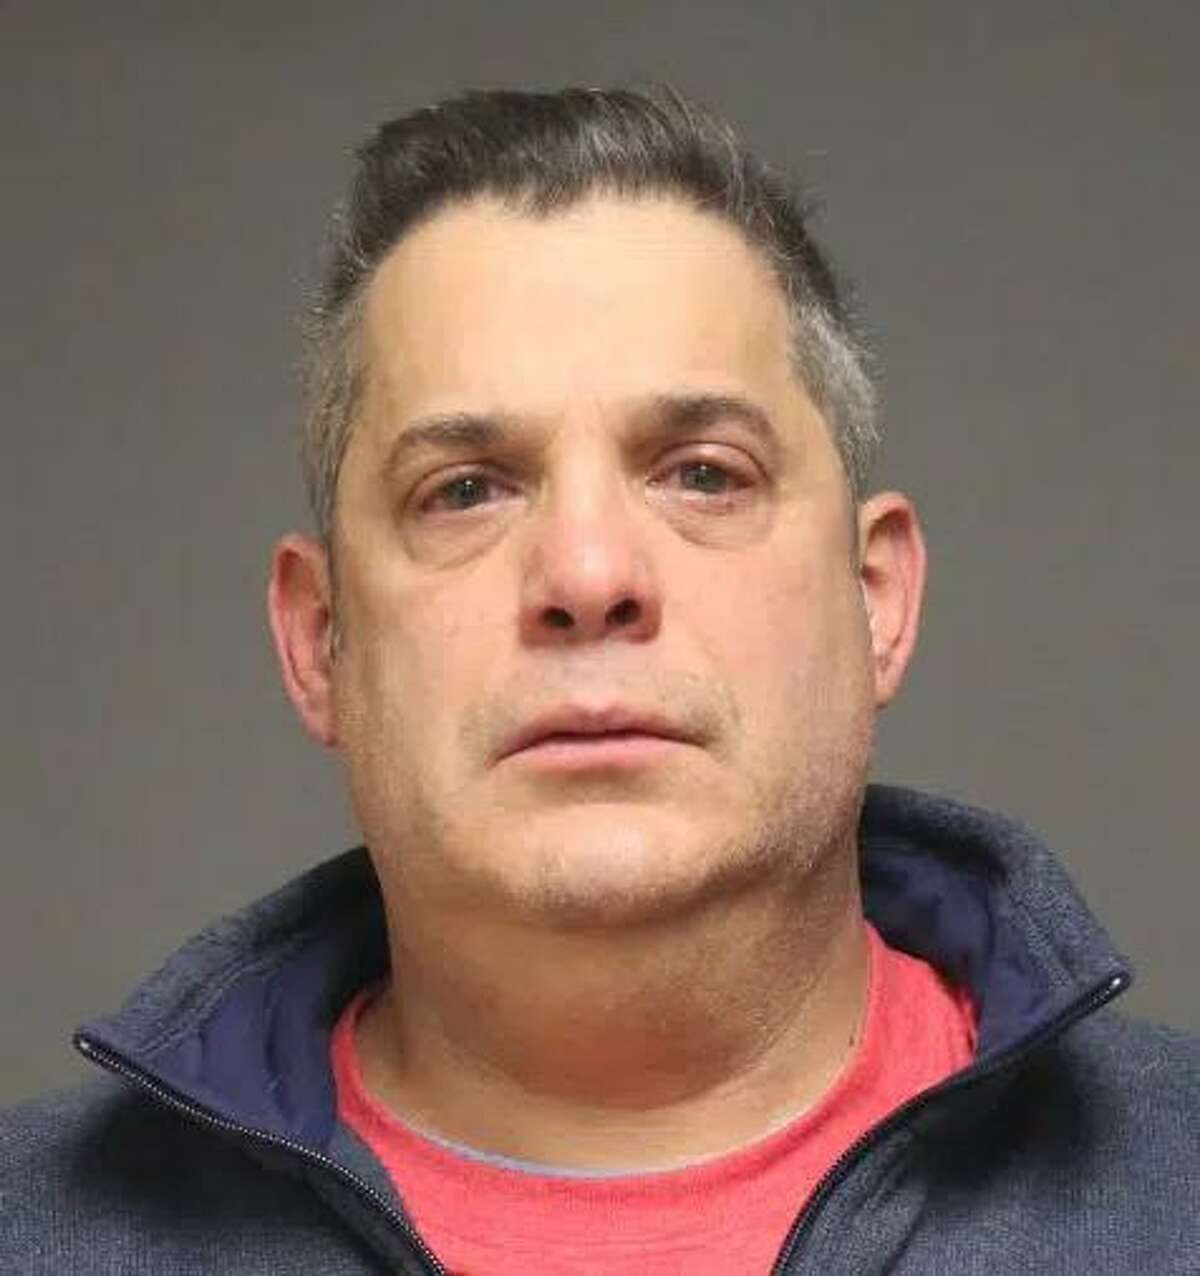 James Iannazzo was arrested and charged with a hate crime in Fairfield, Connecticut. CREDIT: Fairfield Police Department